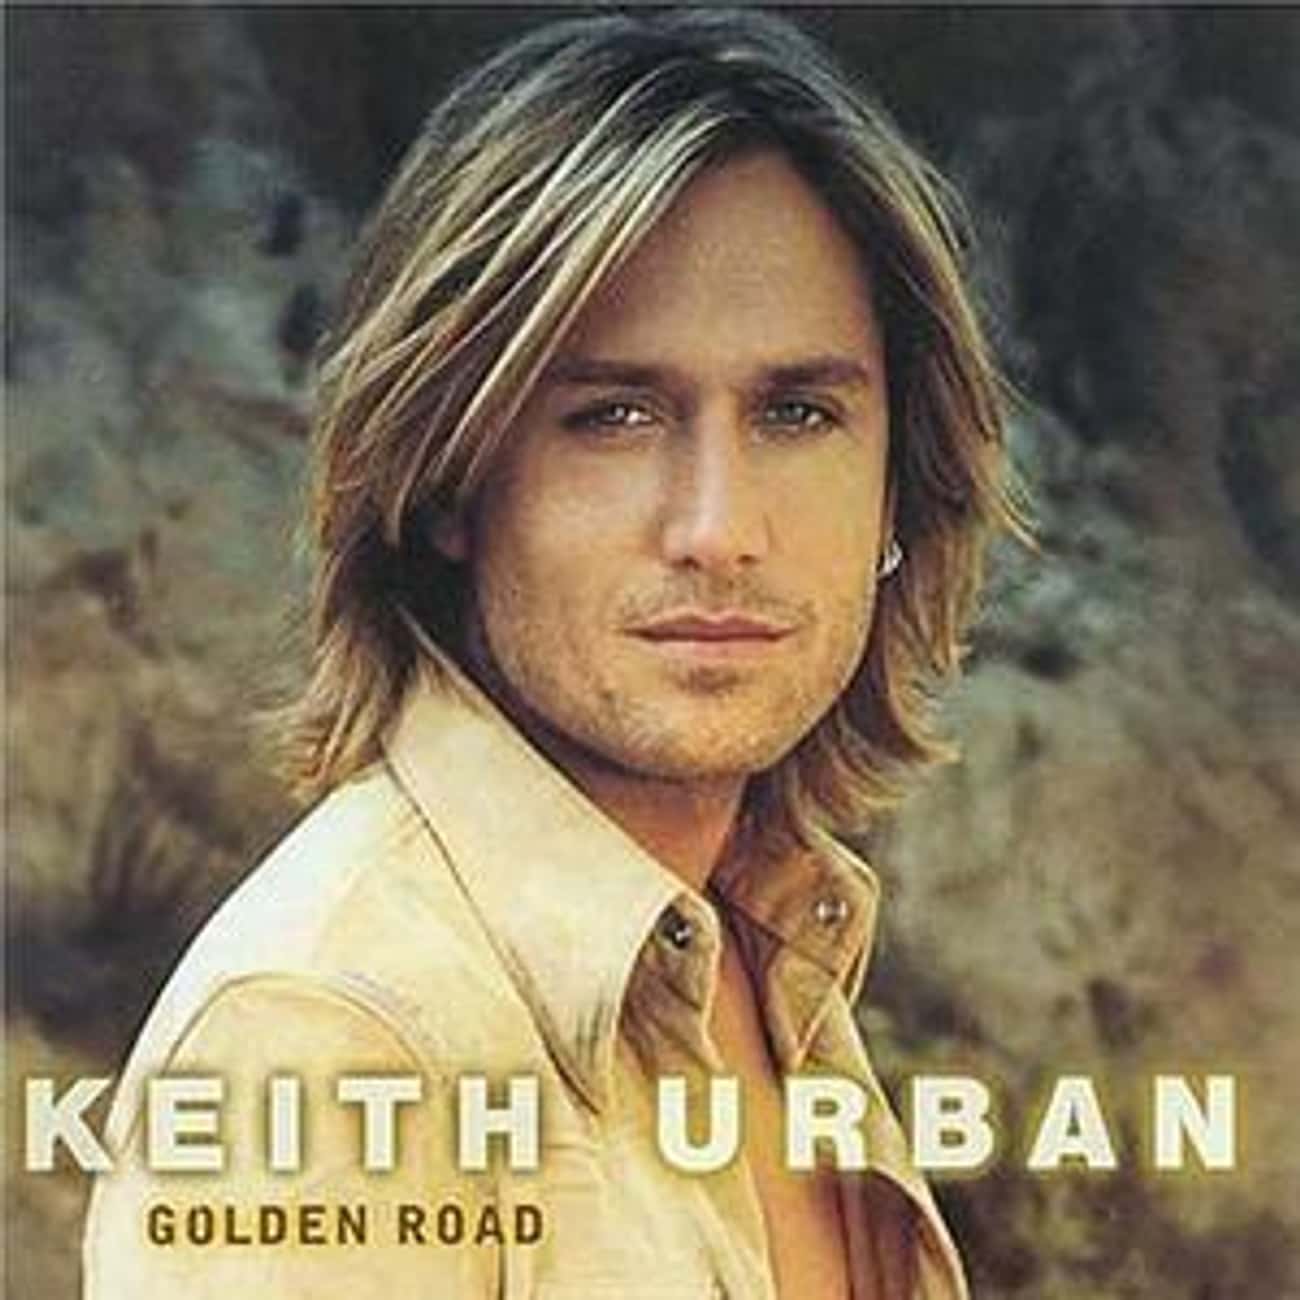 The Best Keith Urban Albums, Ranked By Fans